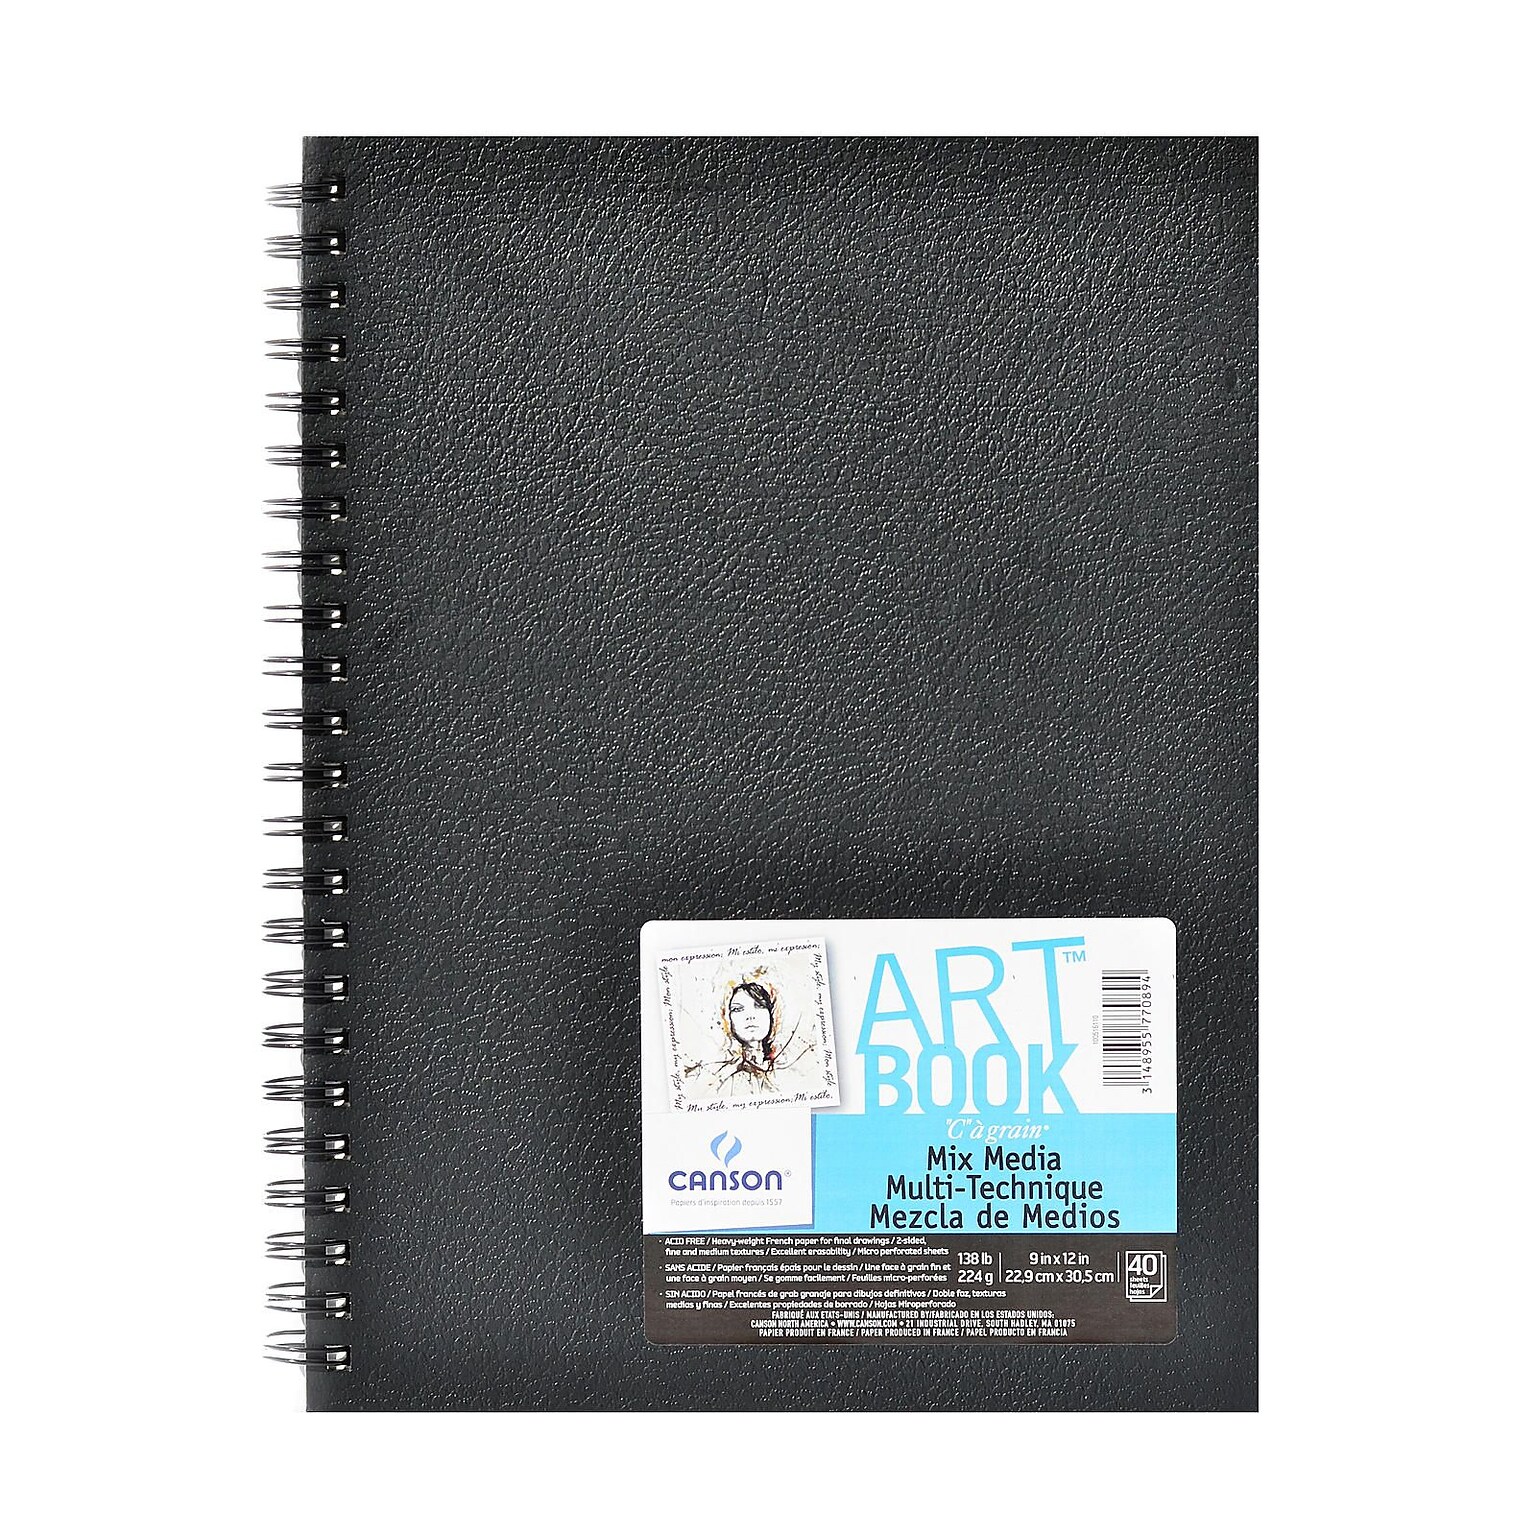 Canson Art Book All Media Watercolor Sketch Books 9 In. X 12 In. Heavy Weight 40 Sheets